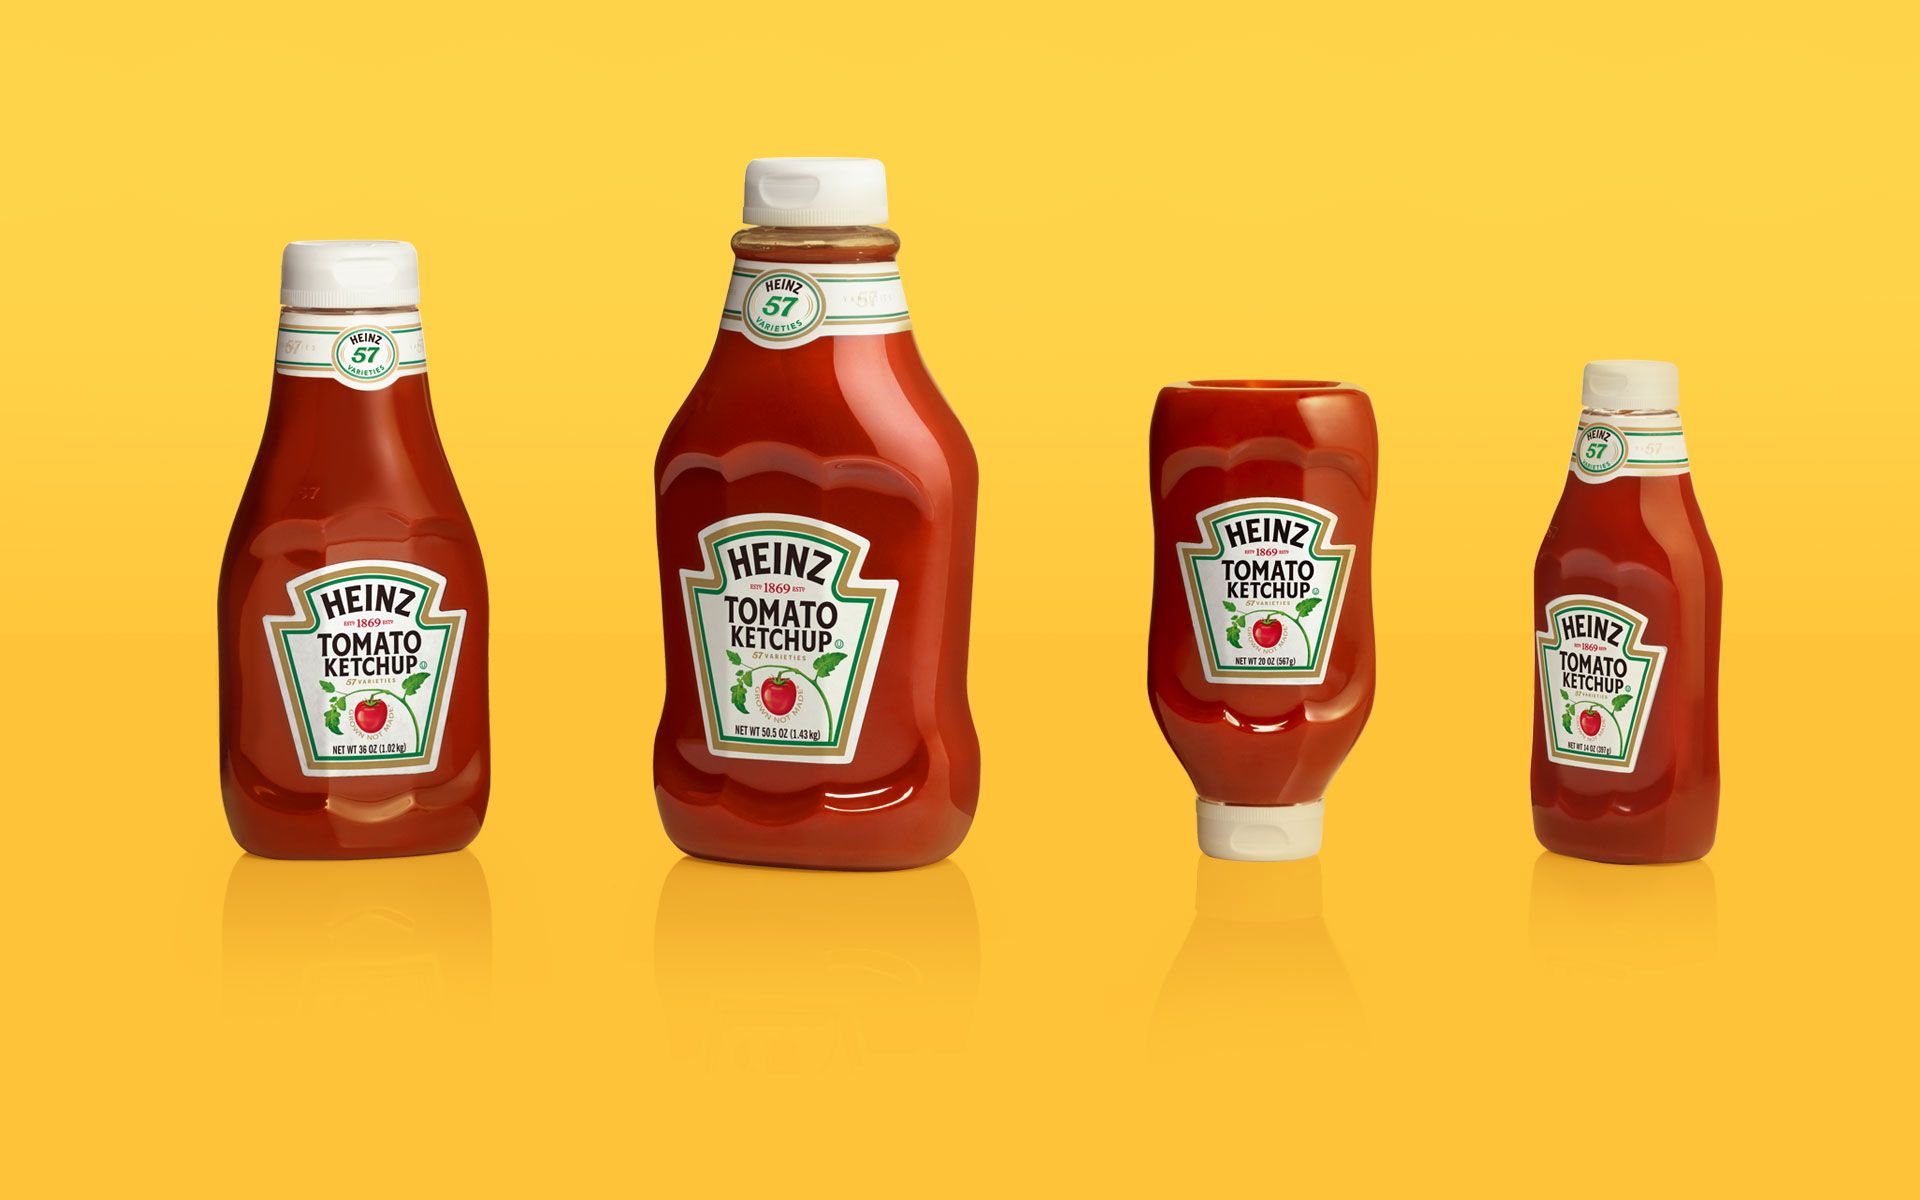 Four examples of a redesigned Heinz ketchup bottle in different sizes and form factors, placed on a yellow background